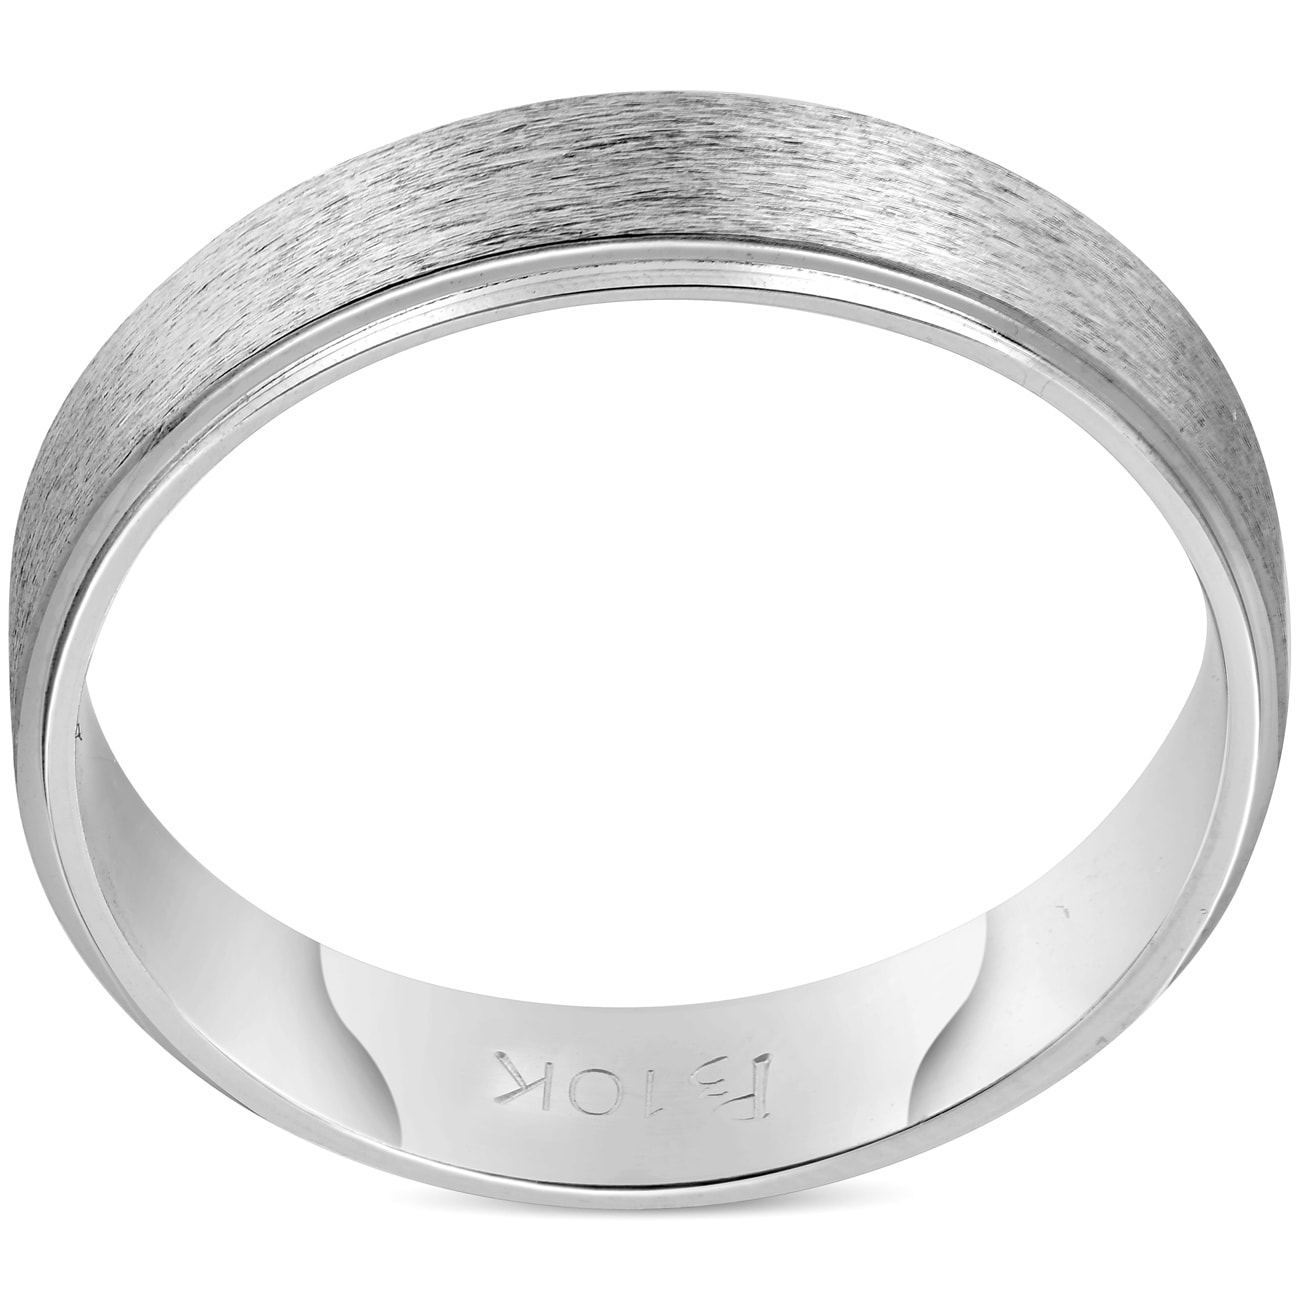 Lex & Lu 10k White Gold 5mm LTW Comfort Fit Band Ring 